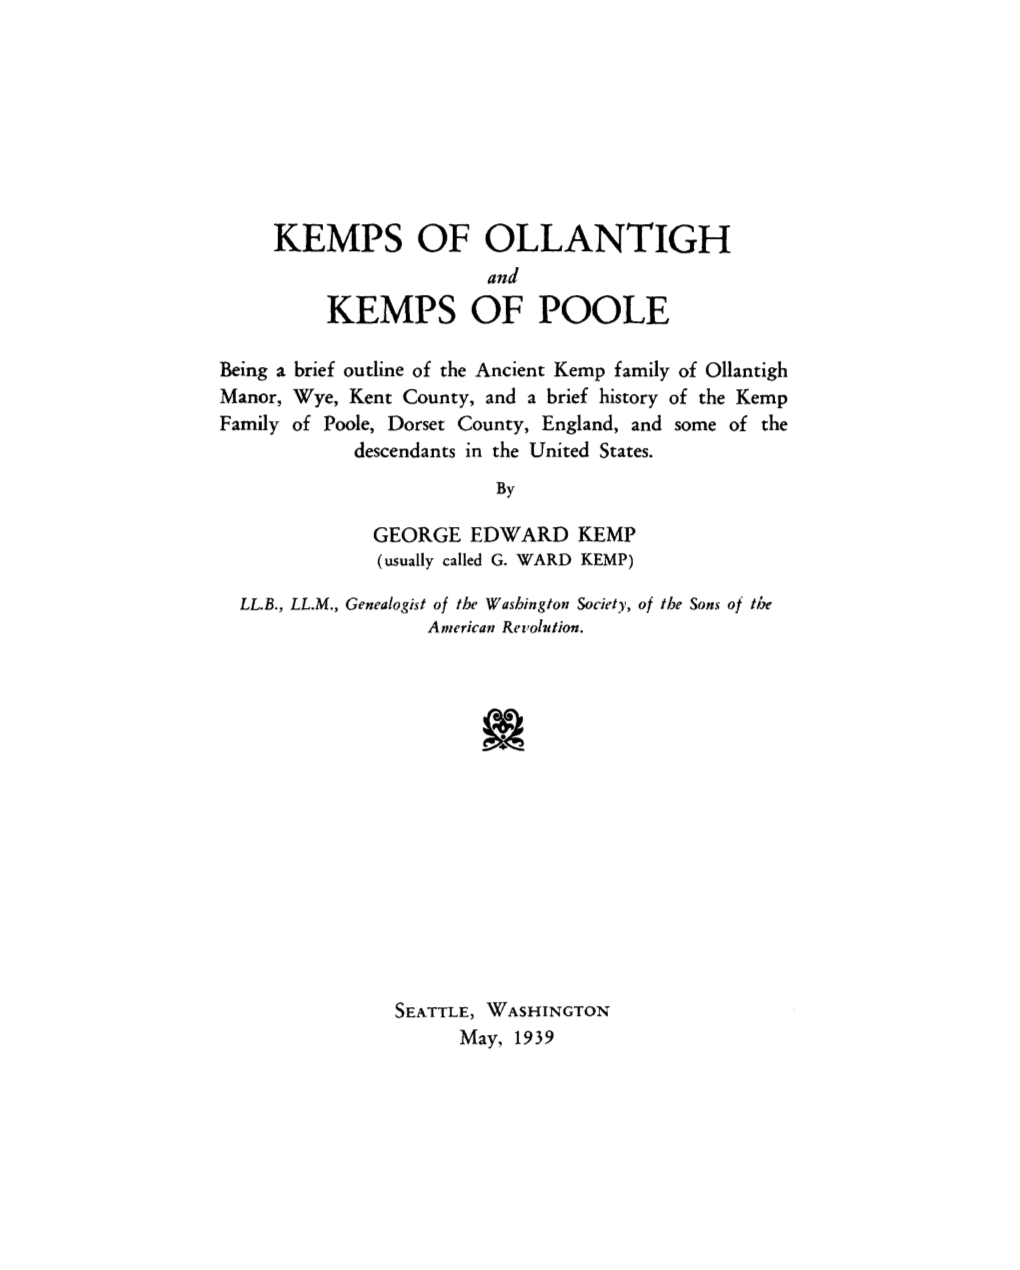 KEMPS of OLLANTIGH and KEMPS of POOLE